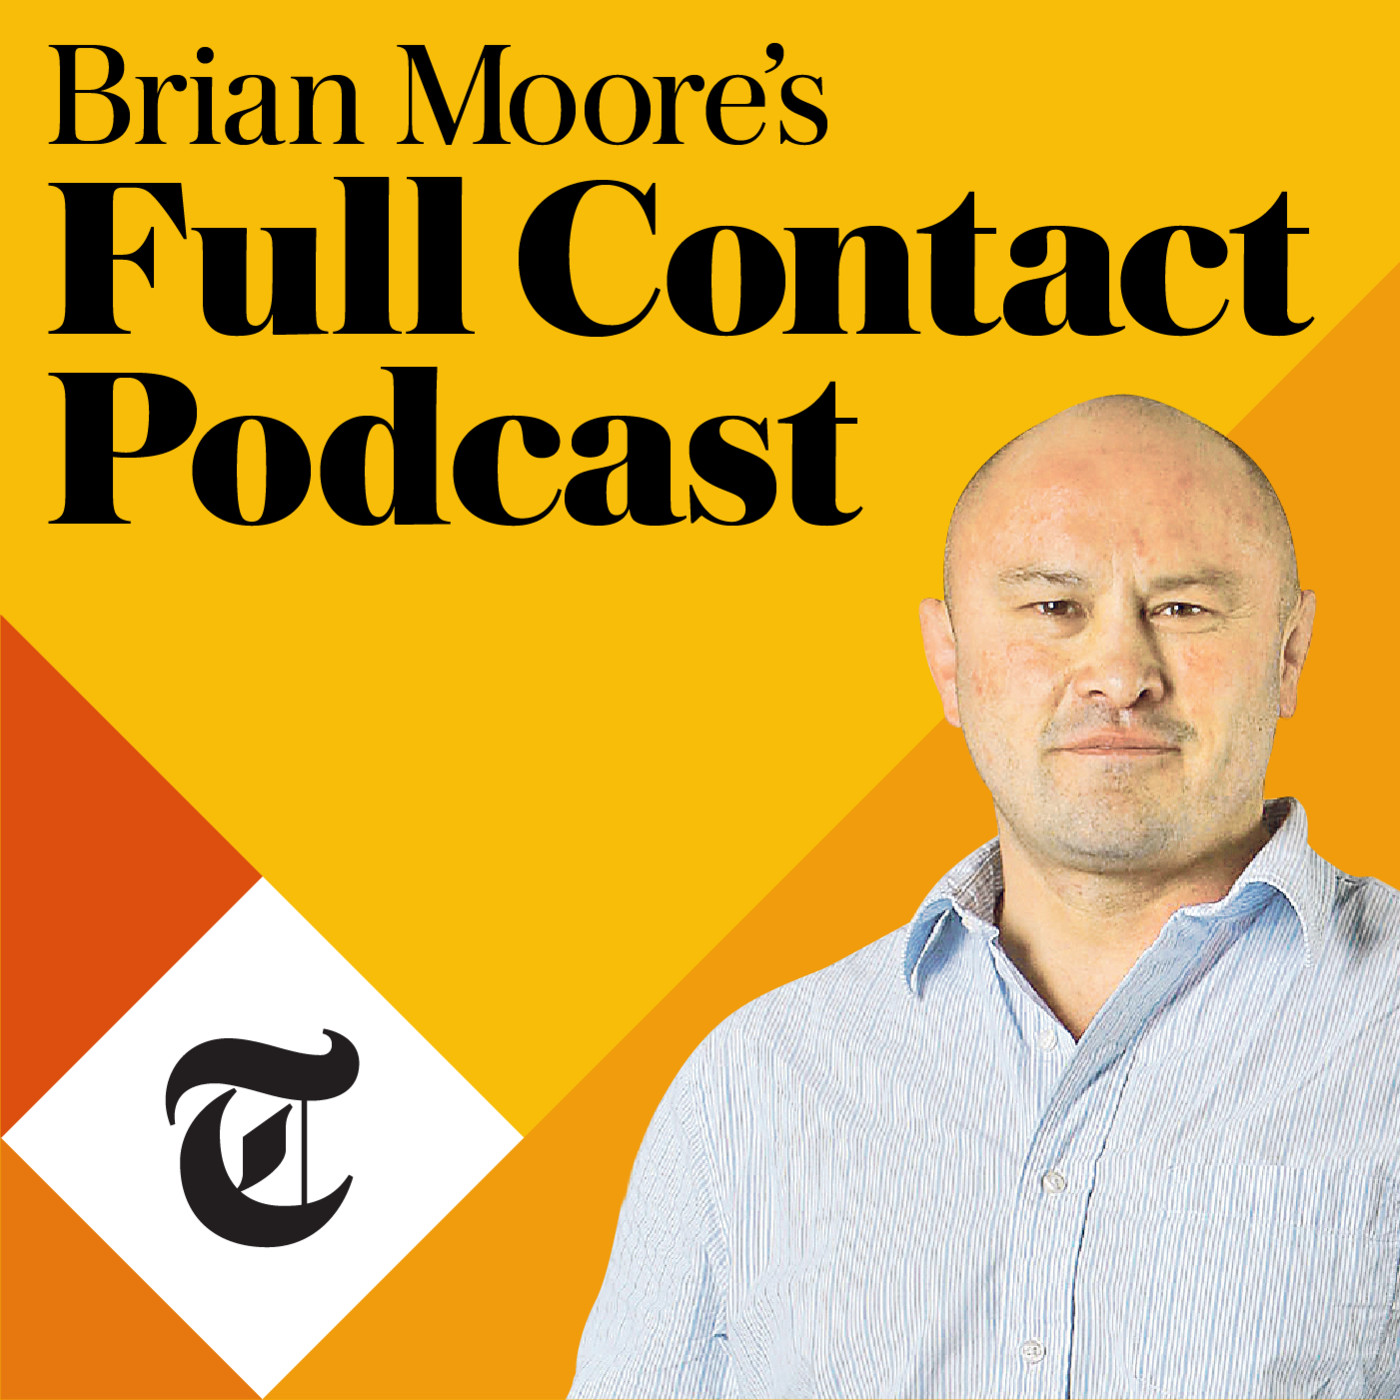 Brian Moore: Rugby's Premiership is starting to resemble Football's Premier League